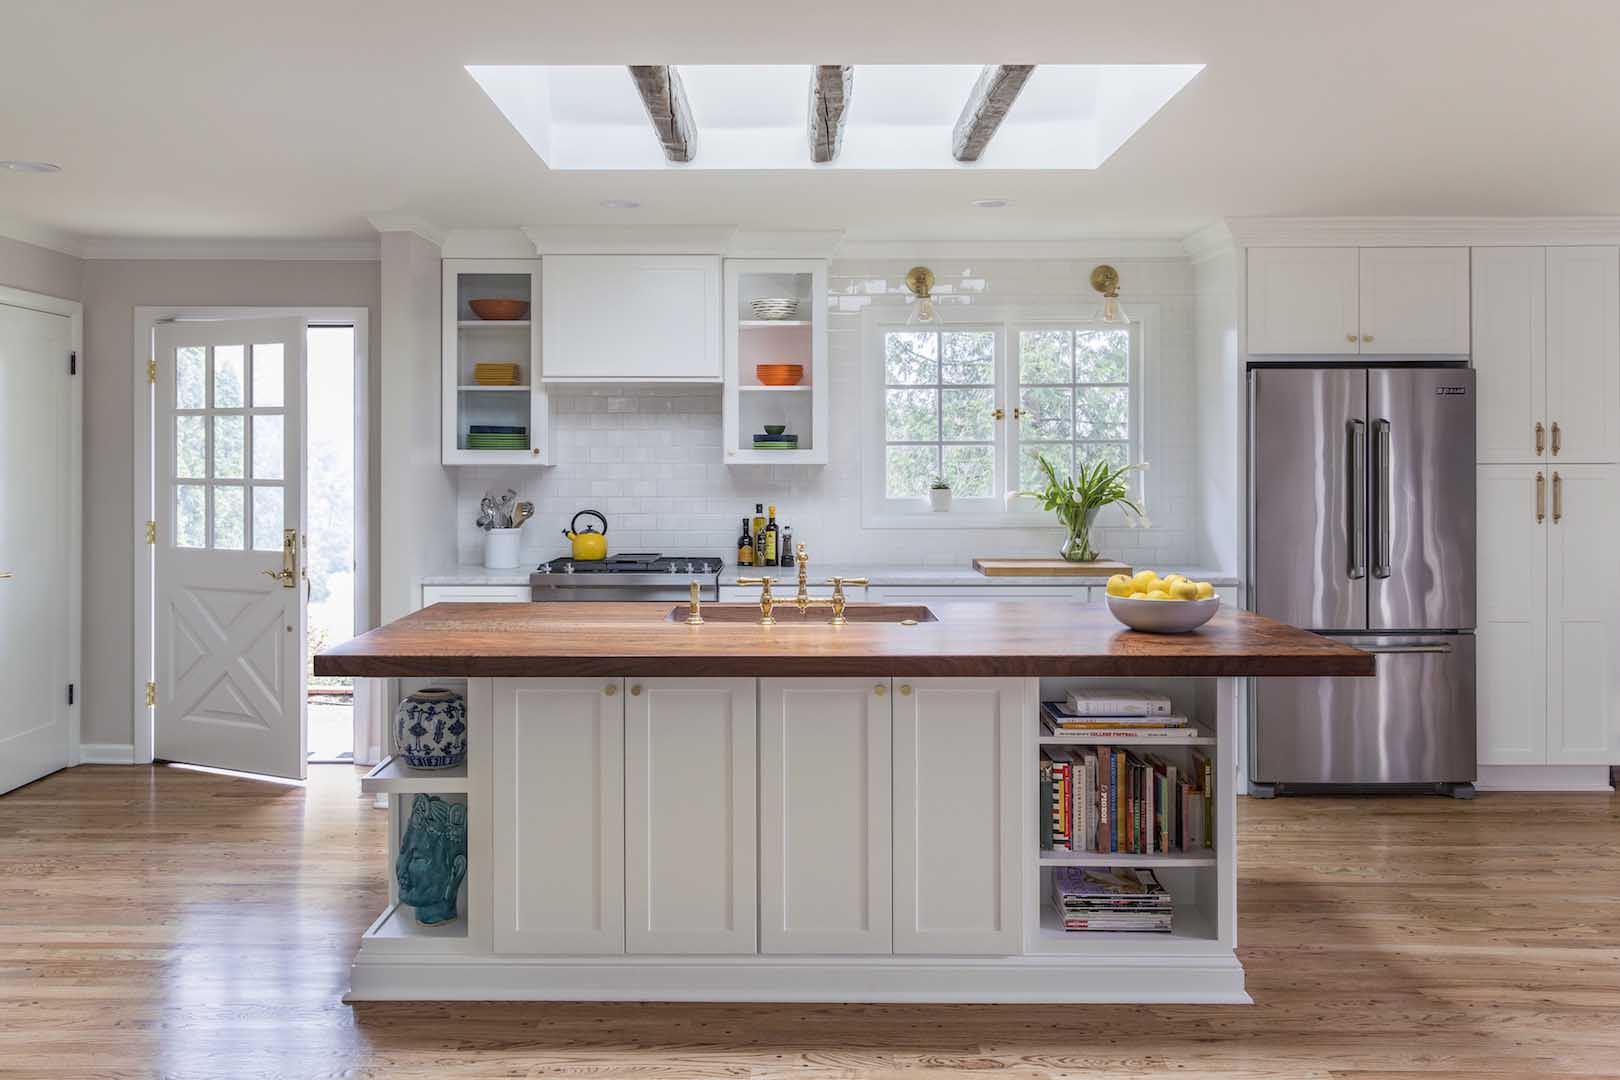 Full kitchen with open shelving, island, and skylight with rustic beams